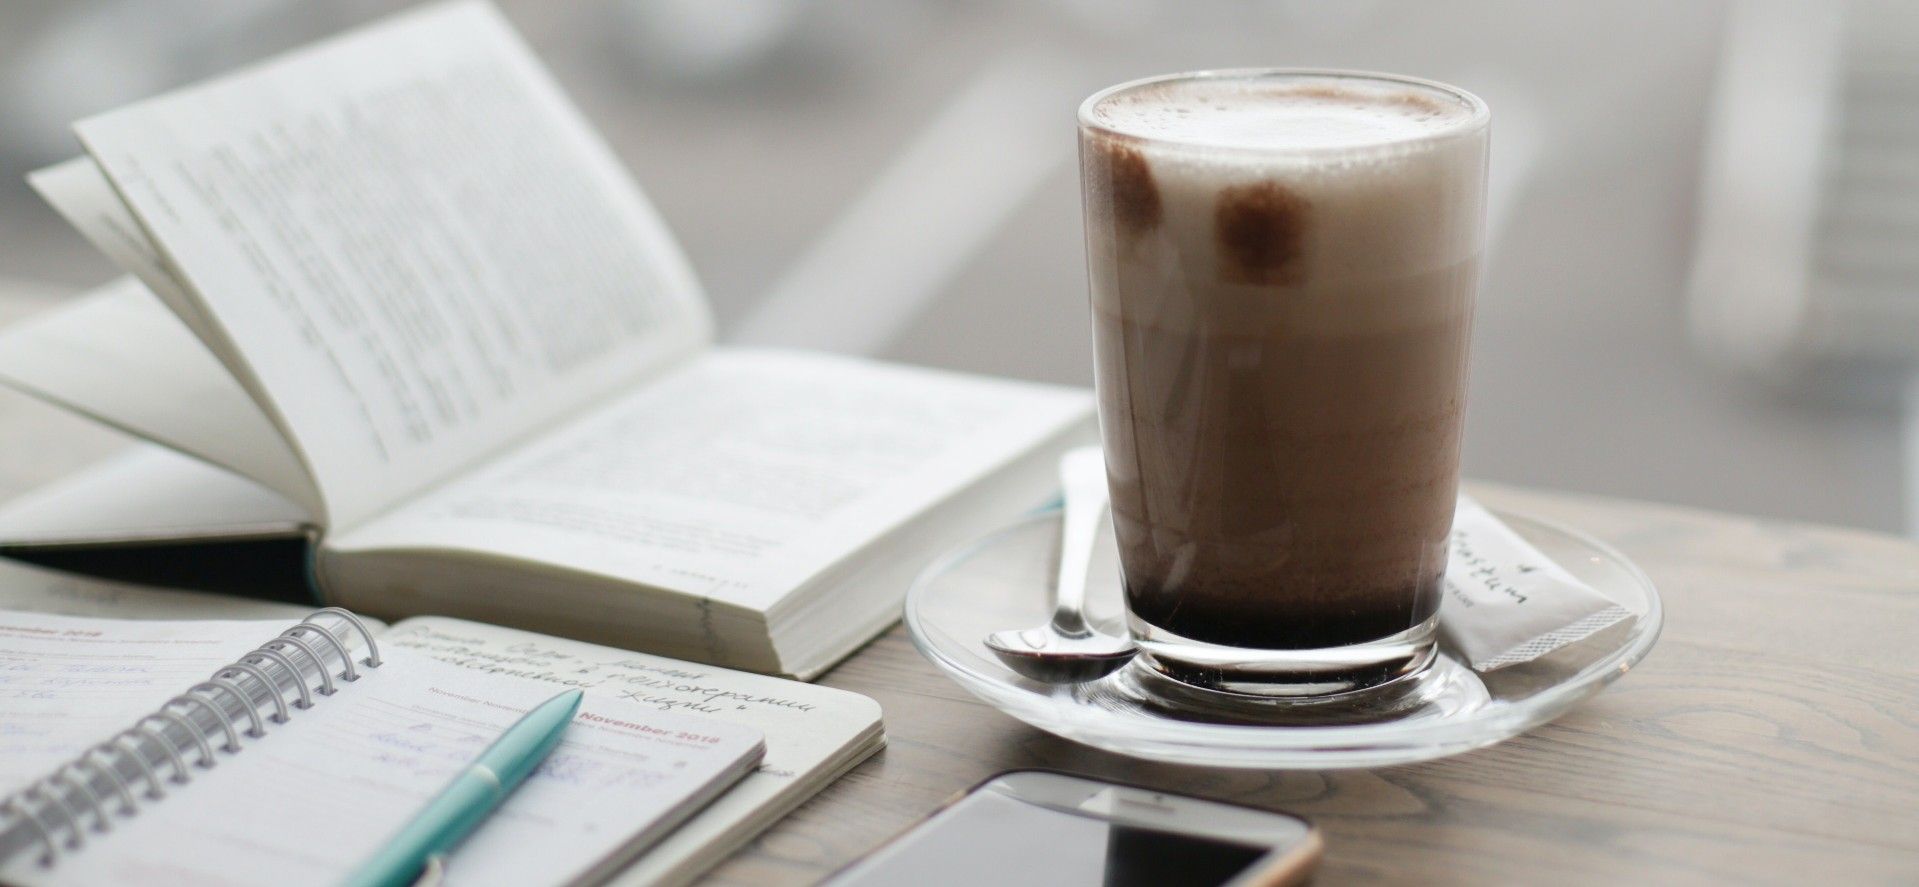 Frothy glass of coffee beside an open book